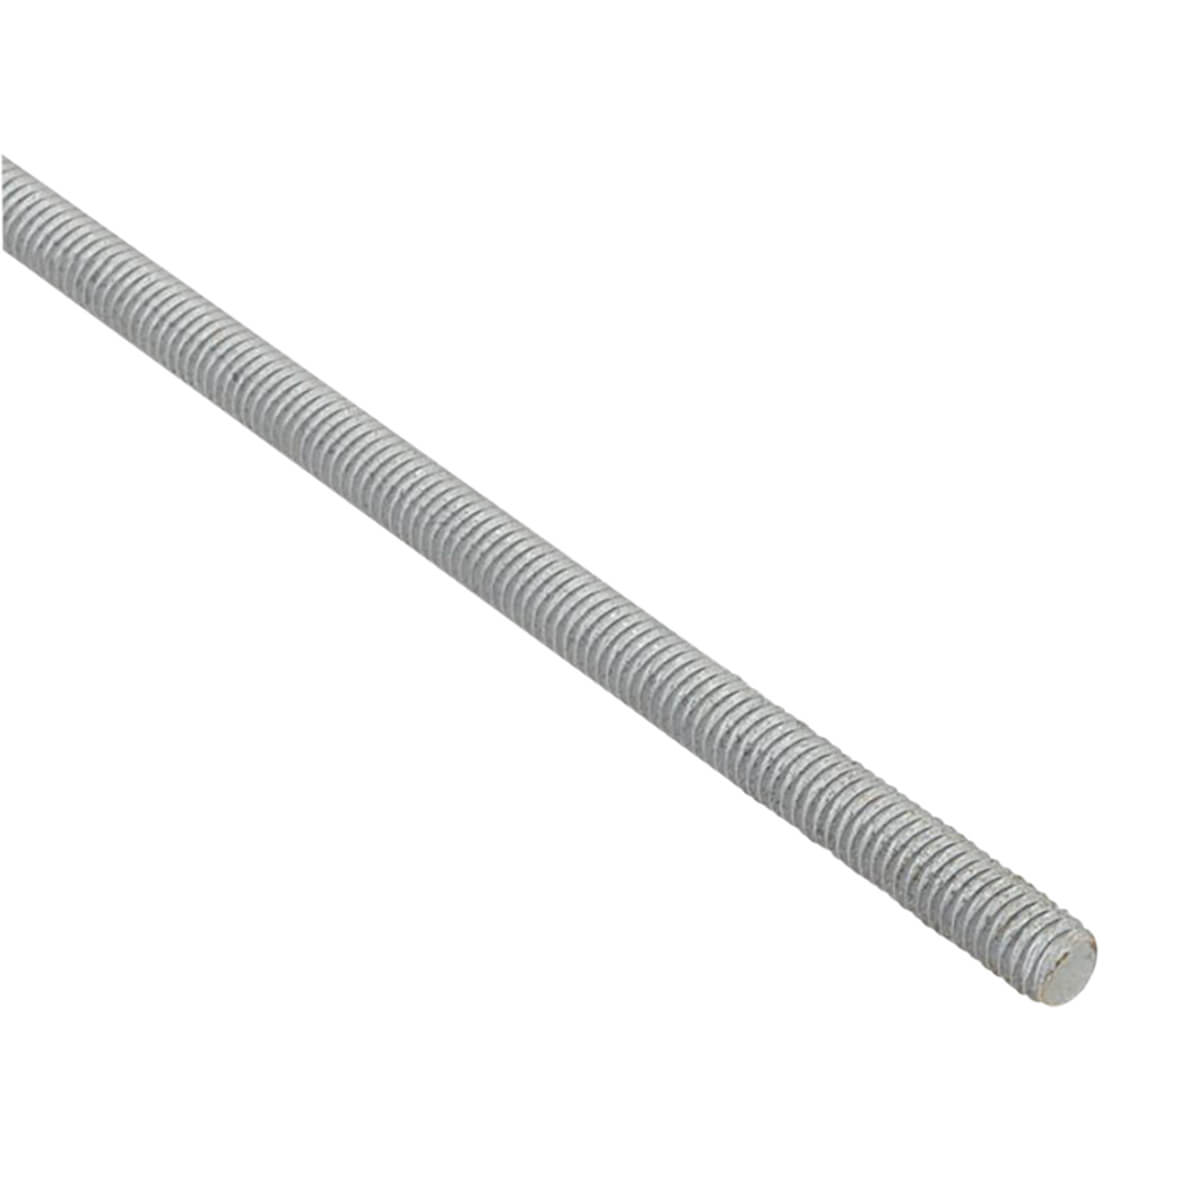 Threaded Rod - Yellow Tip - 3/8-in-16 - 72-in